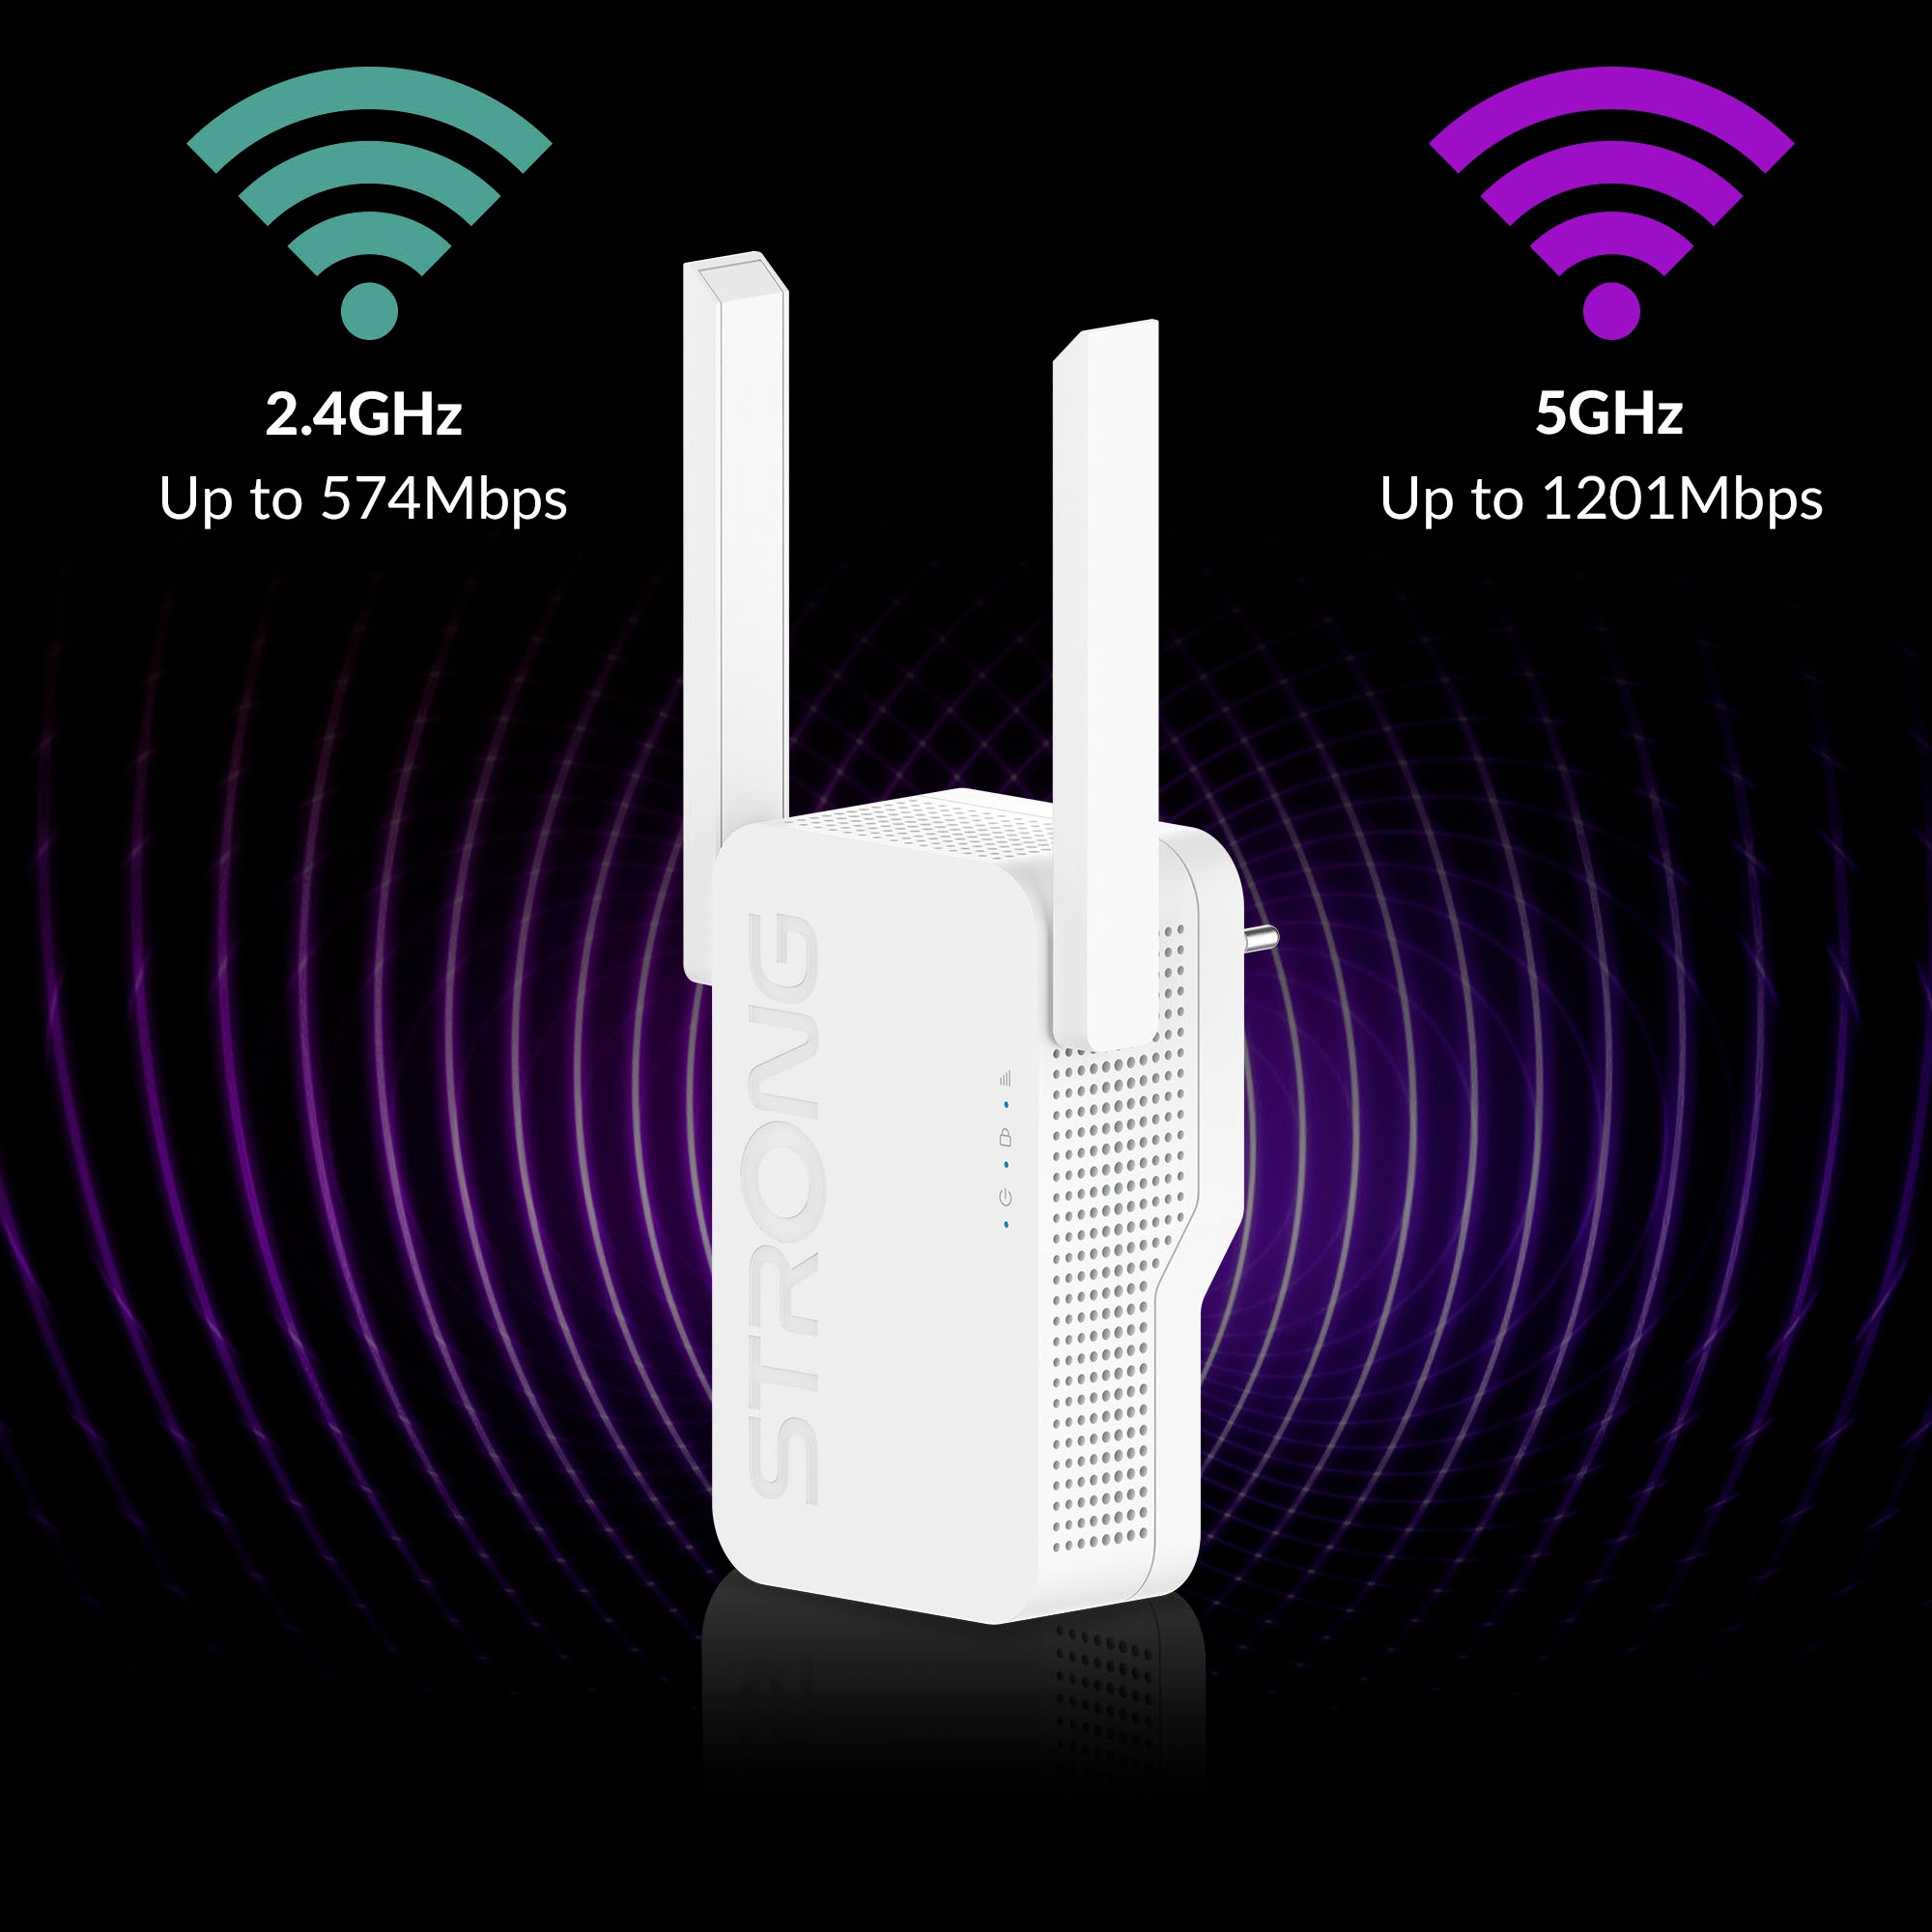 Strong WLAN-Repeater »Dualband WLAN Repeater bis 1800 Mbit/s, WiFi 6, Accesspoint«, (1 St.)